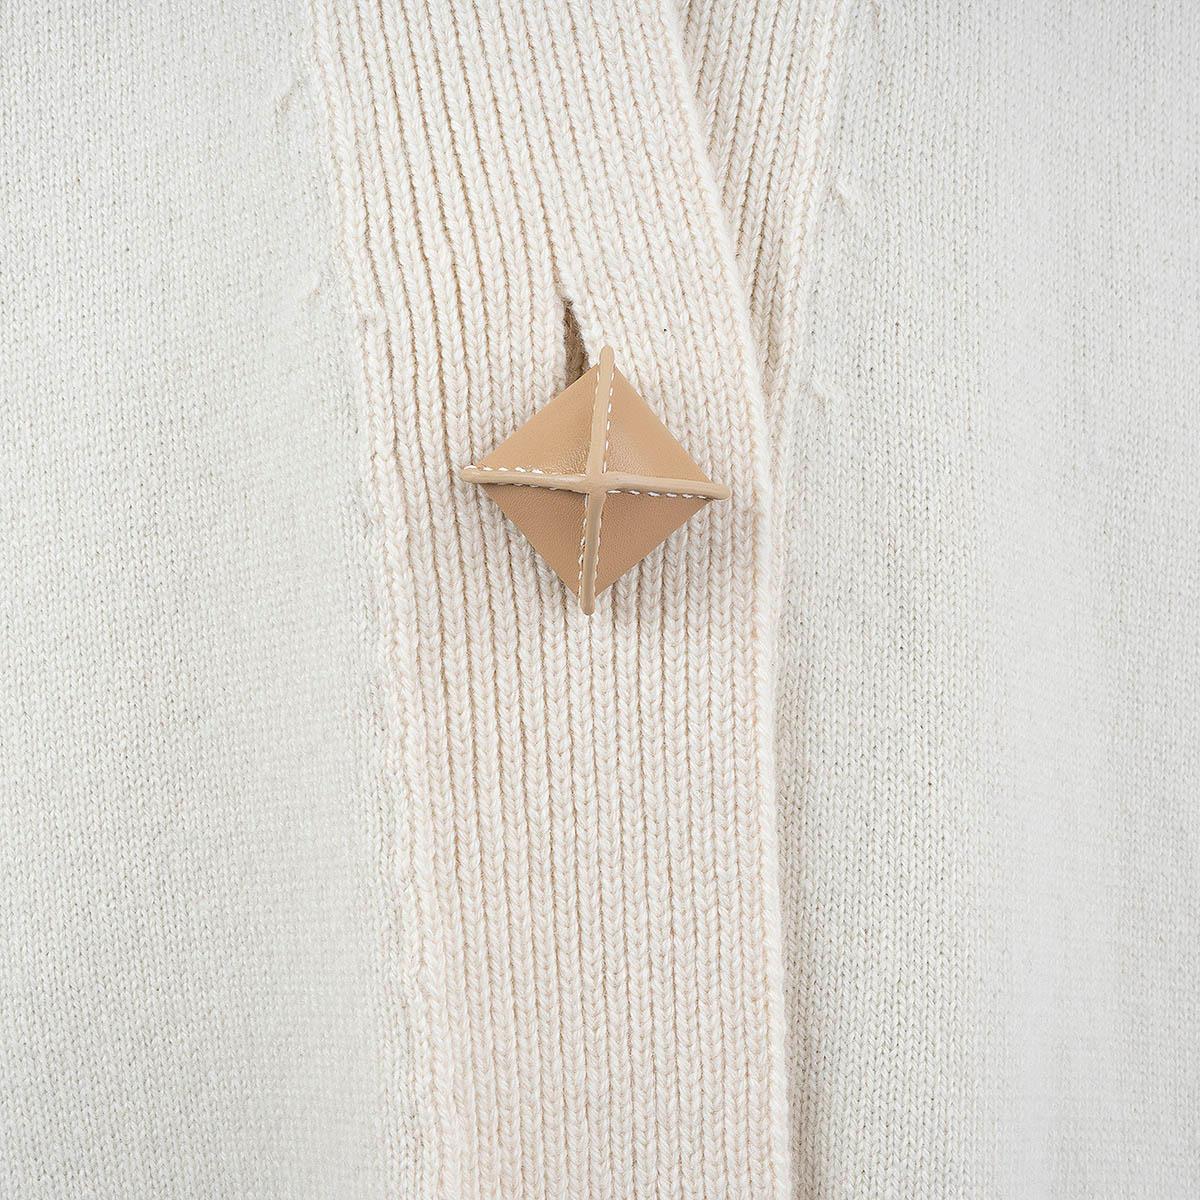 HERMES ivory cashmere PYRAMID BUTTON LONG KNIT Coat Jacket 34 XS For Sale 2